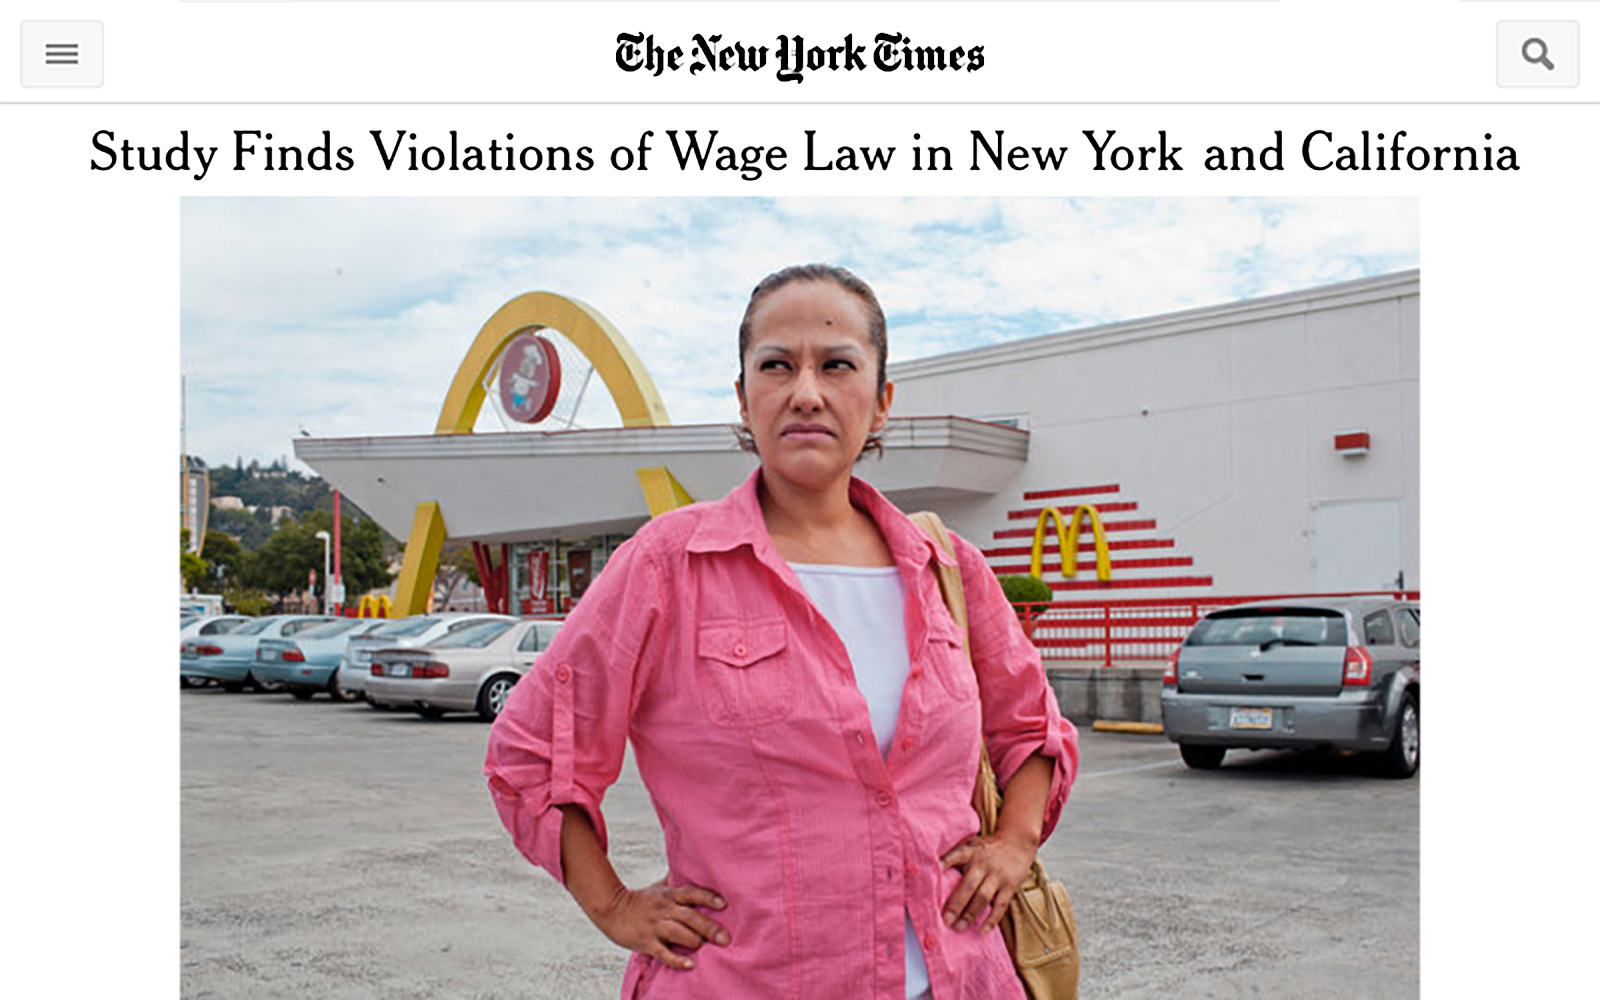 Screenshot of online New York Times page with headline "Study Finds Violations of Wage Law in New York and California" and a photo of a woman standing in front of a fast food restaurant, hands on hips, looking into the distance with anger in her eyes.